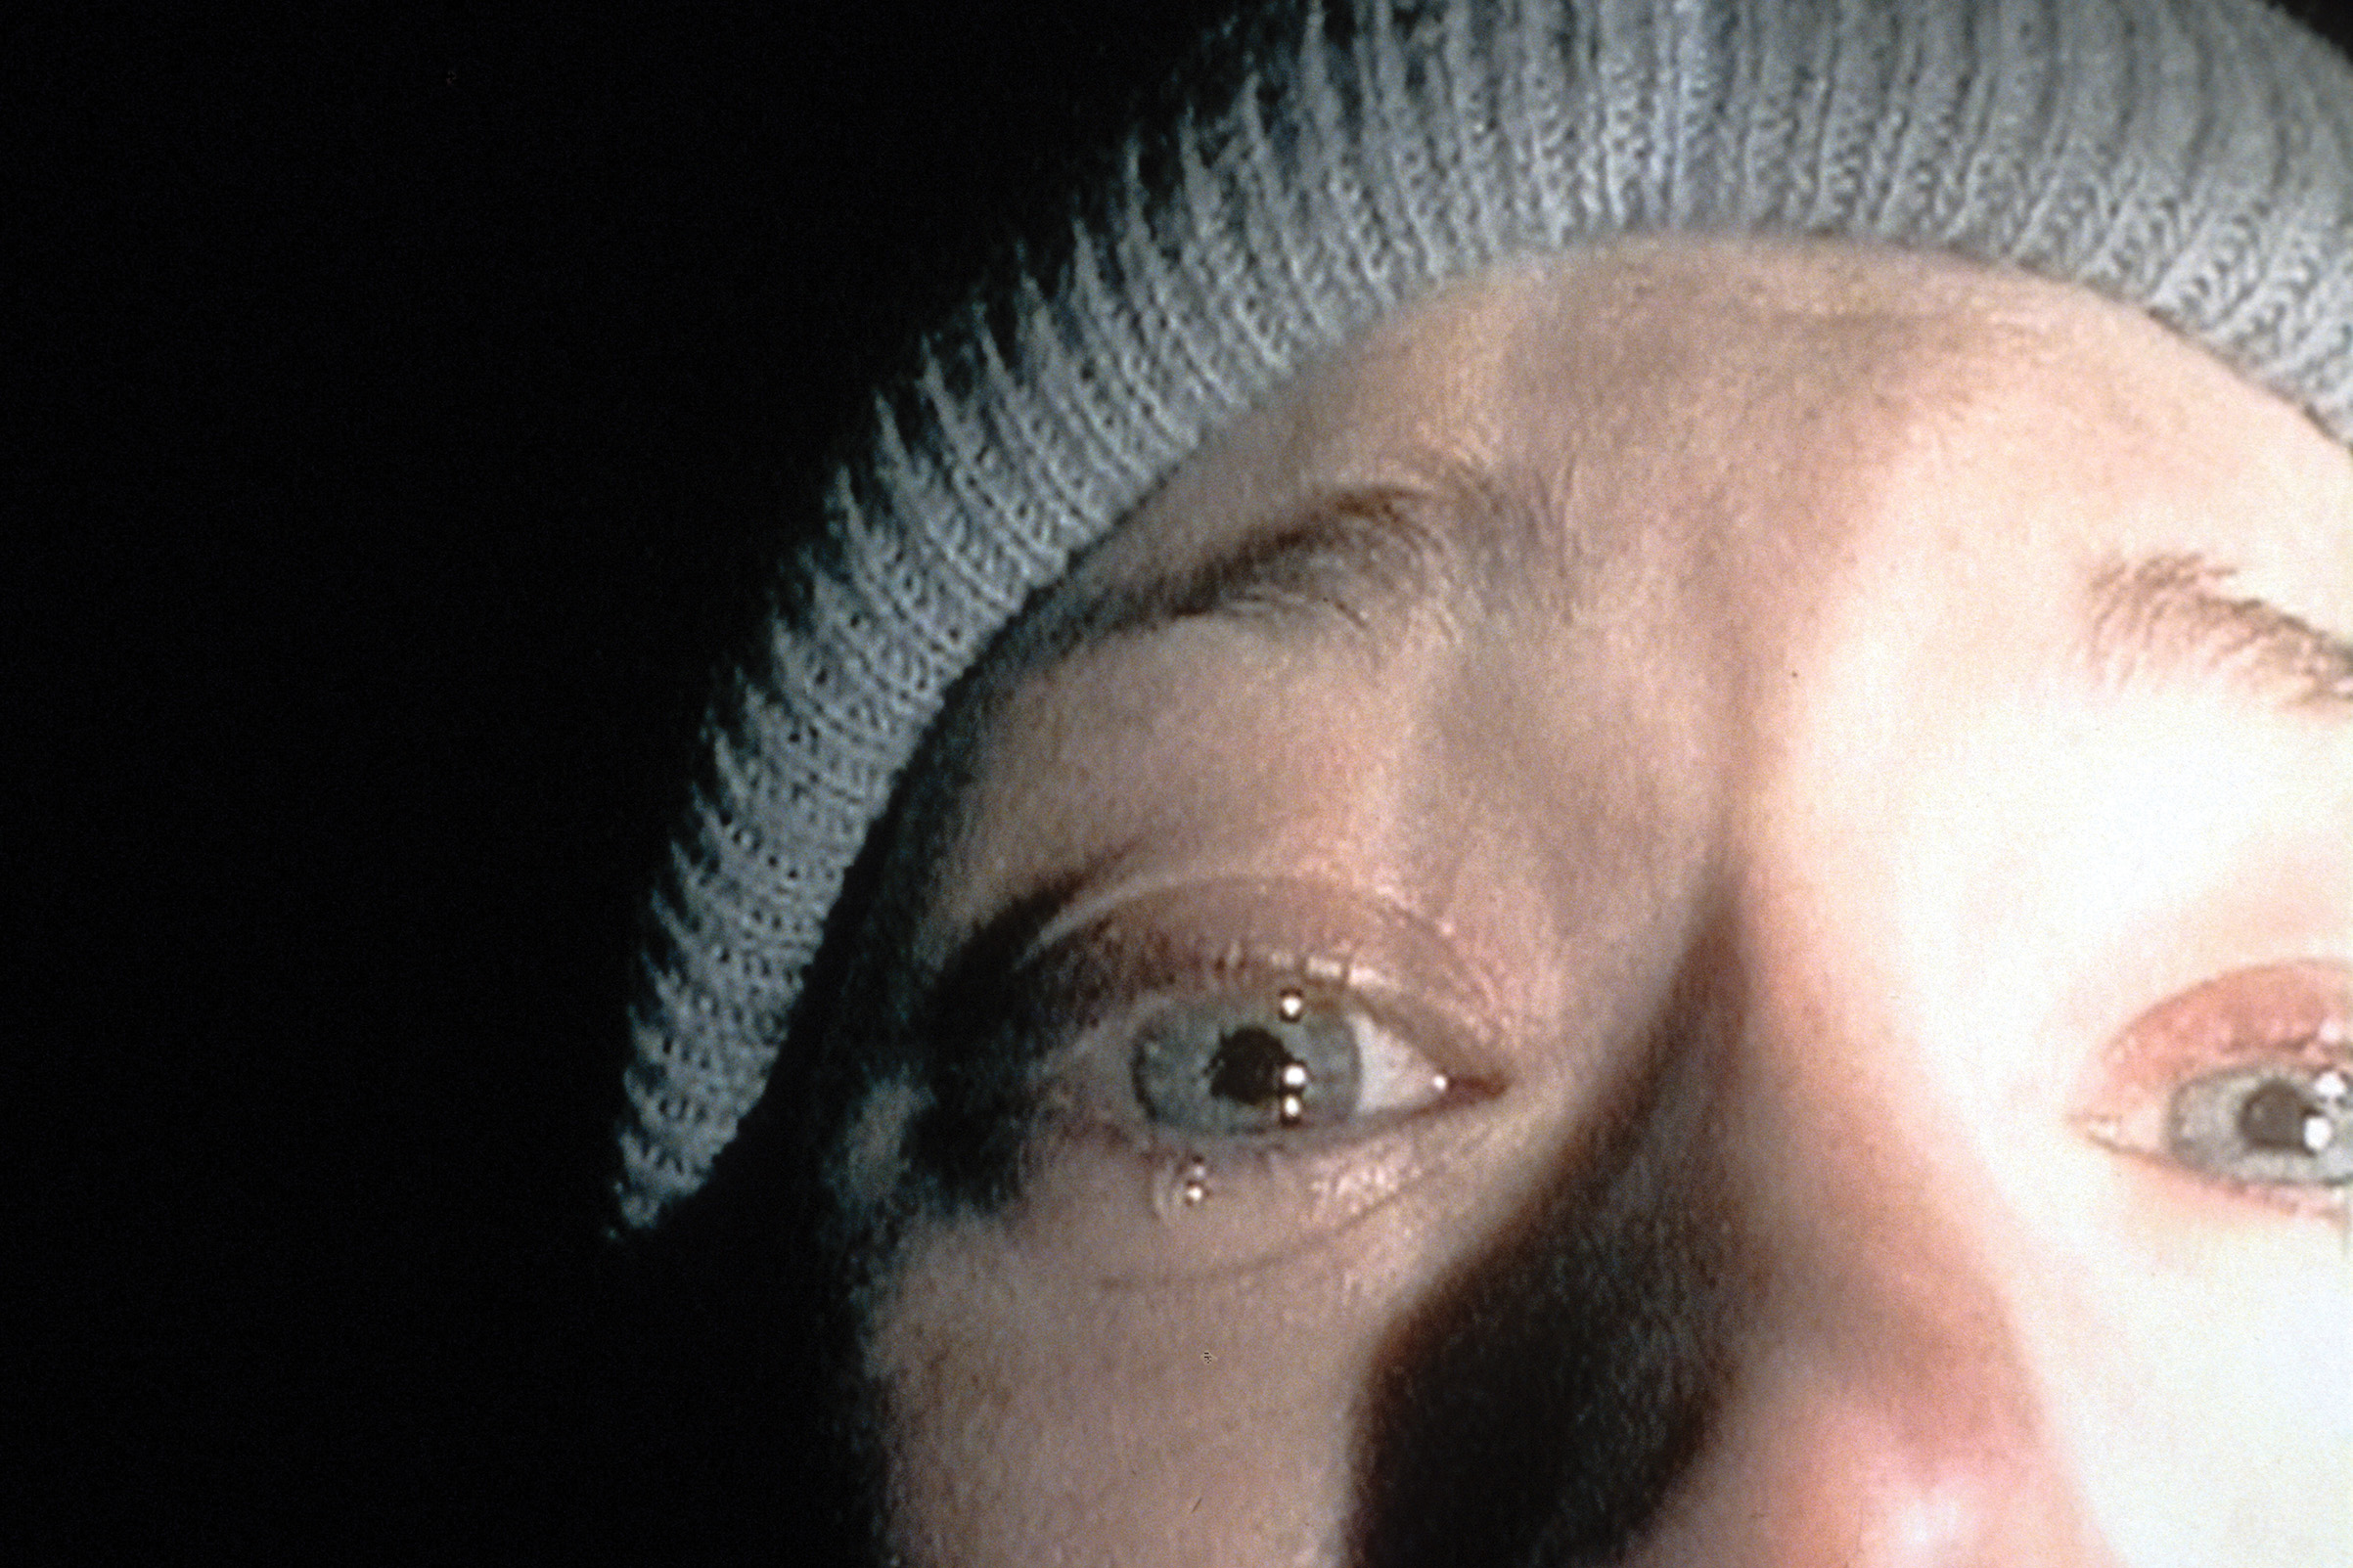 Heather Donahue in a scene from the film 'The Blair Witch Project', 1999. (Hulton Archive/Getty Images)